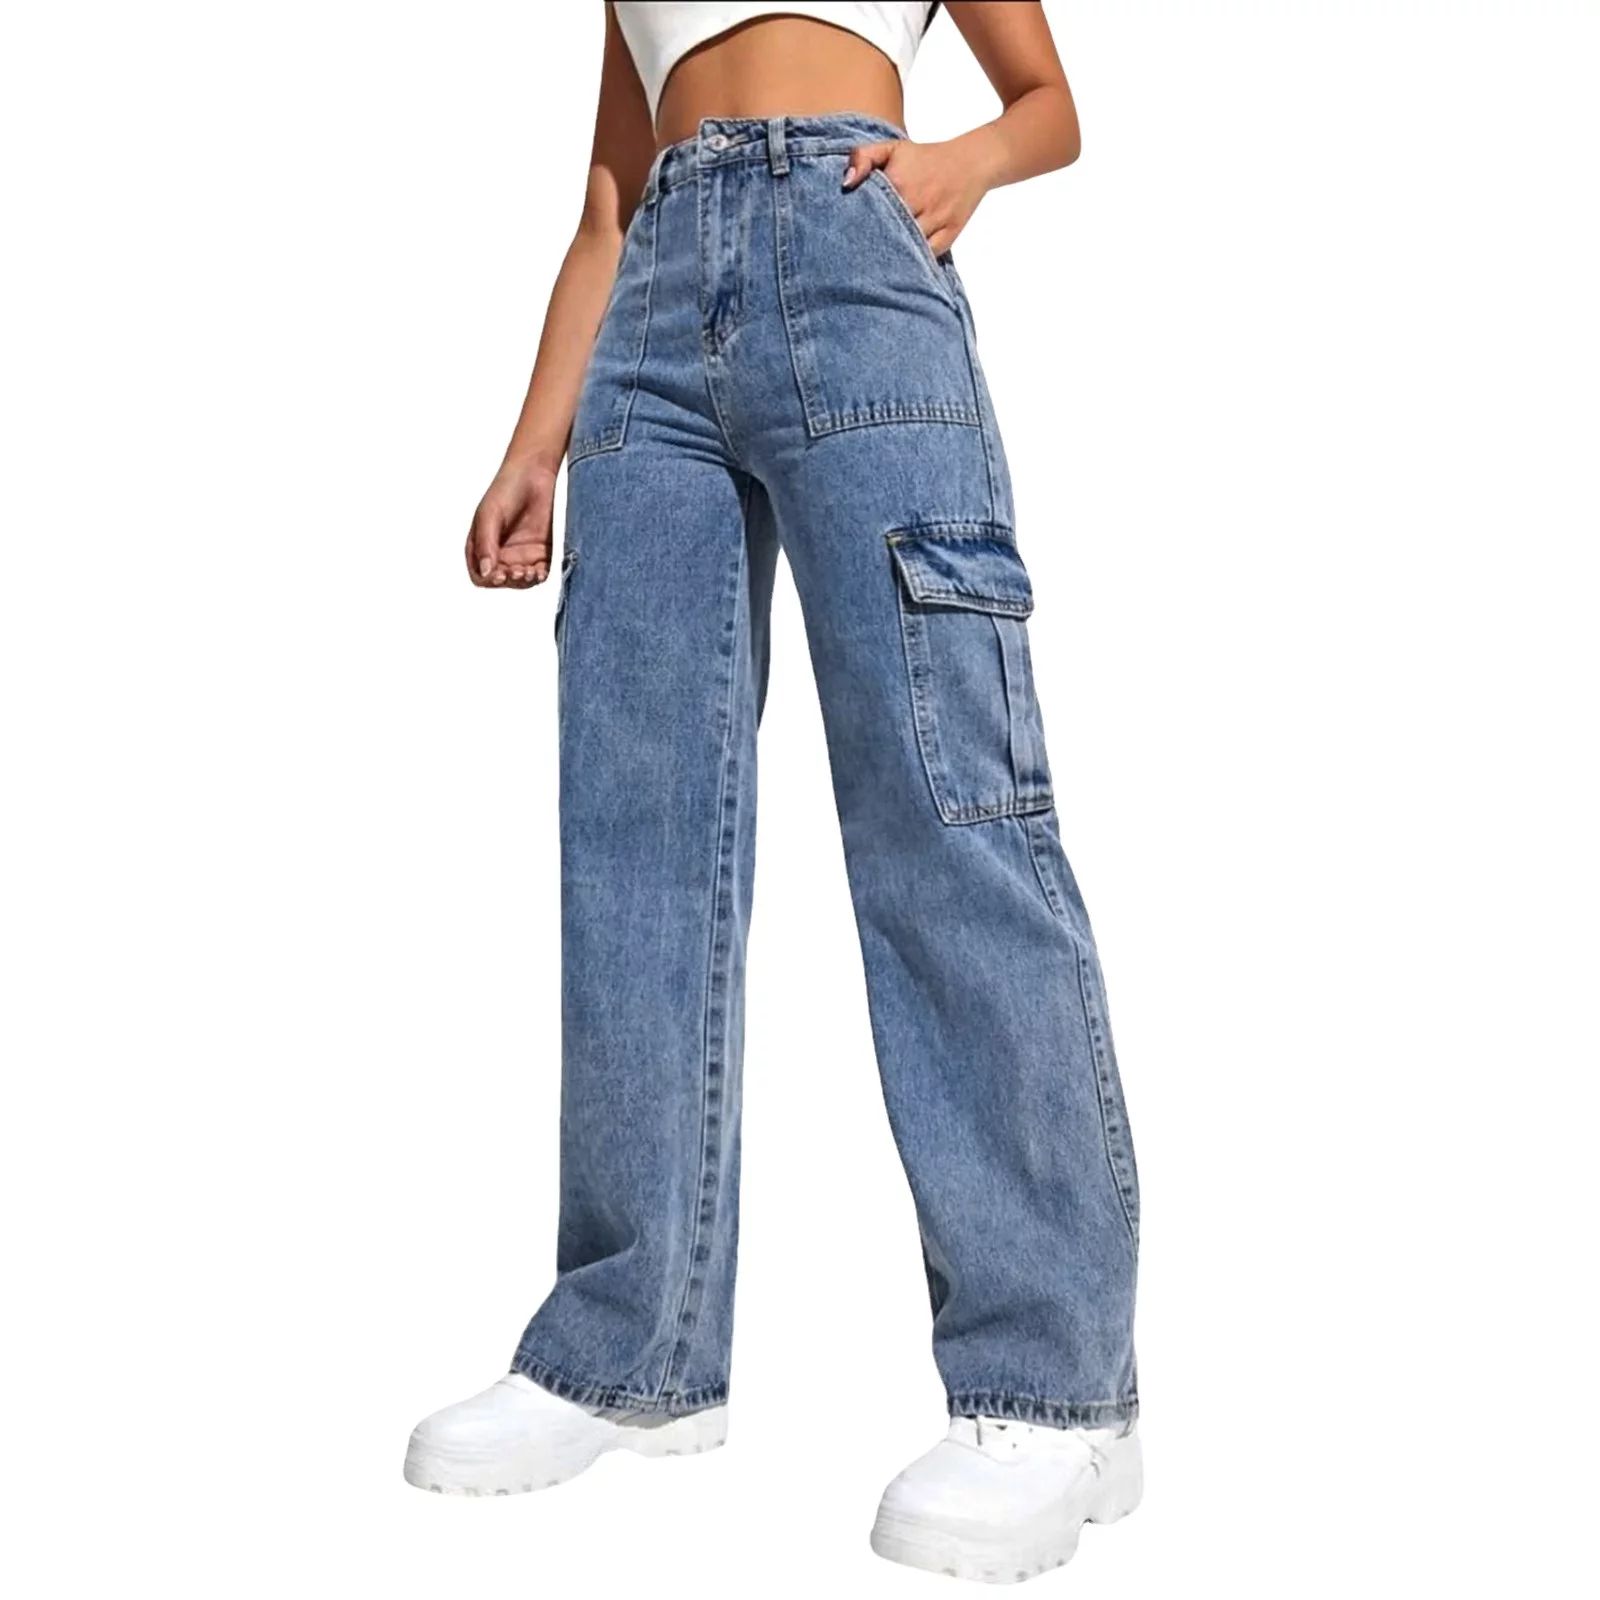 GWAABD Denim Jeans for Women with Big Pockets Baggy Cargo Jeans Trousers Casual High Waist Straig... | Walmart (US)